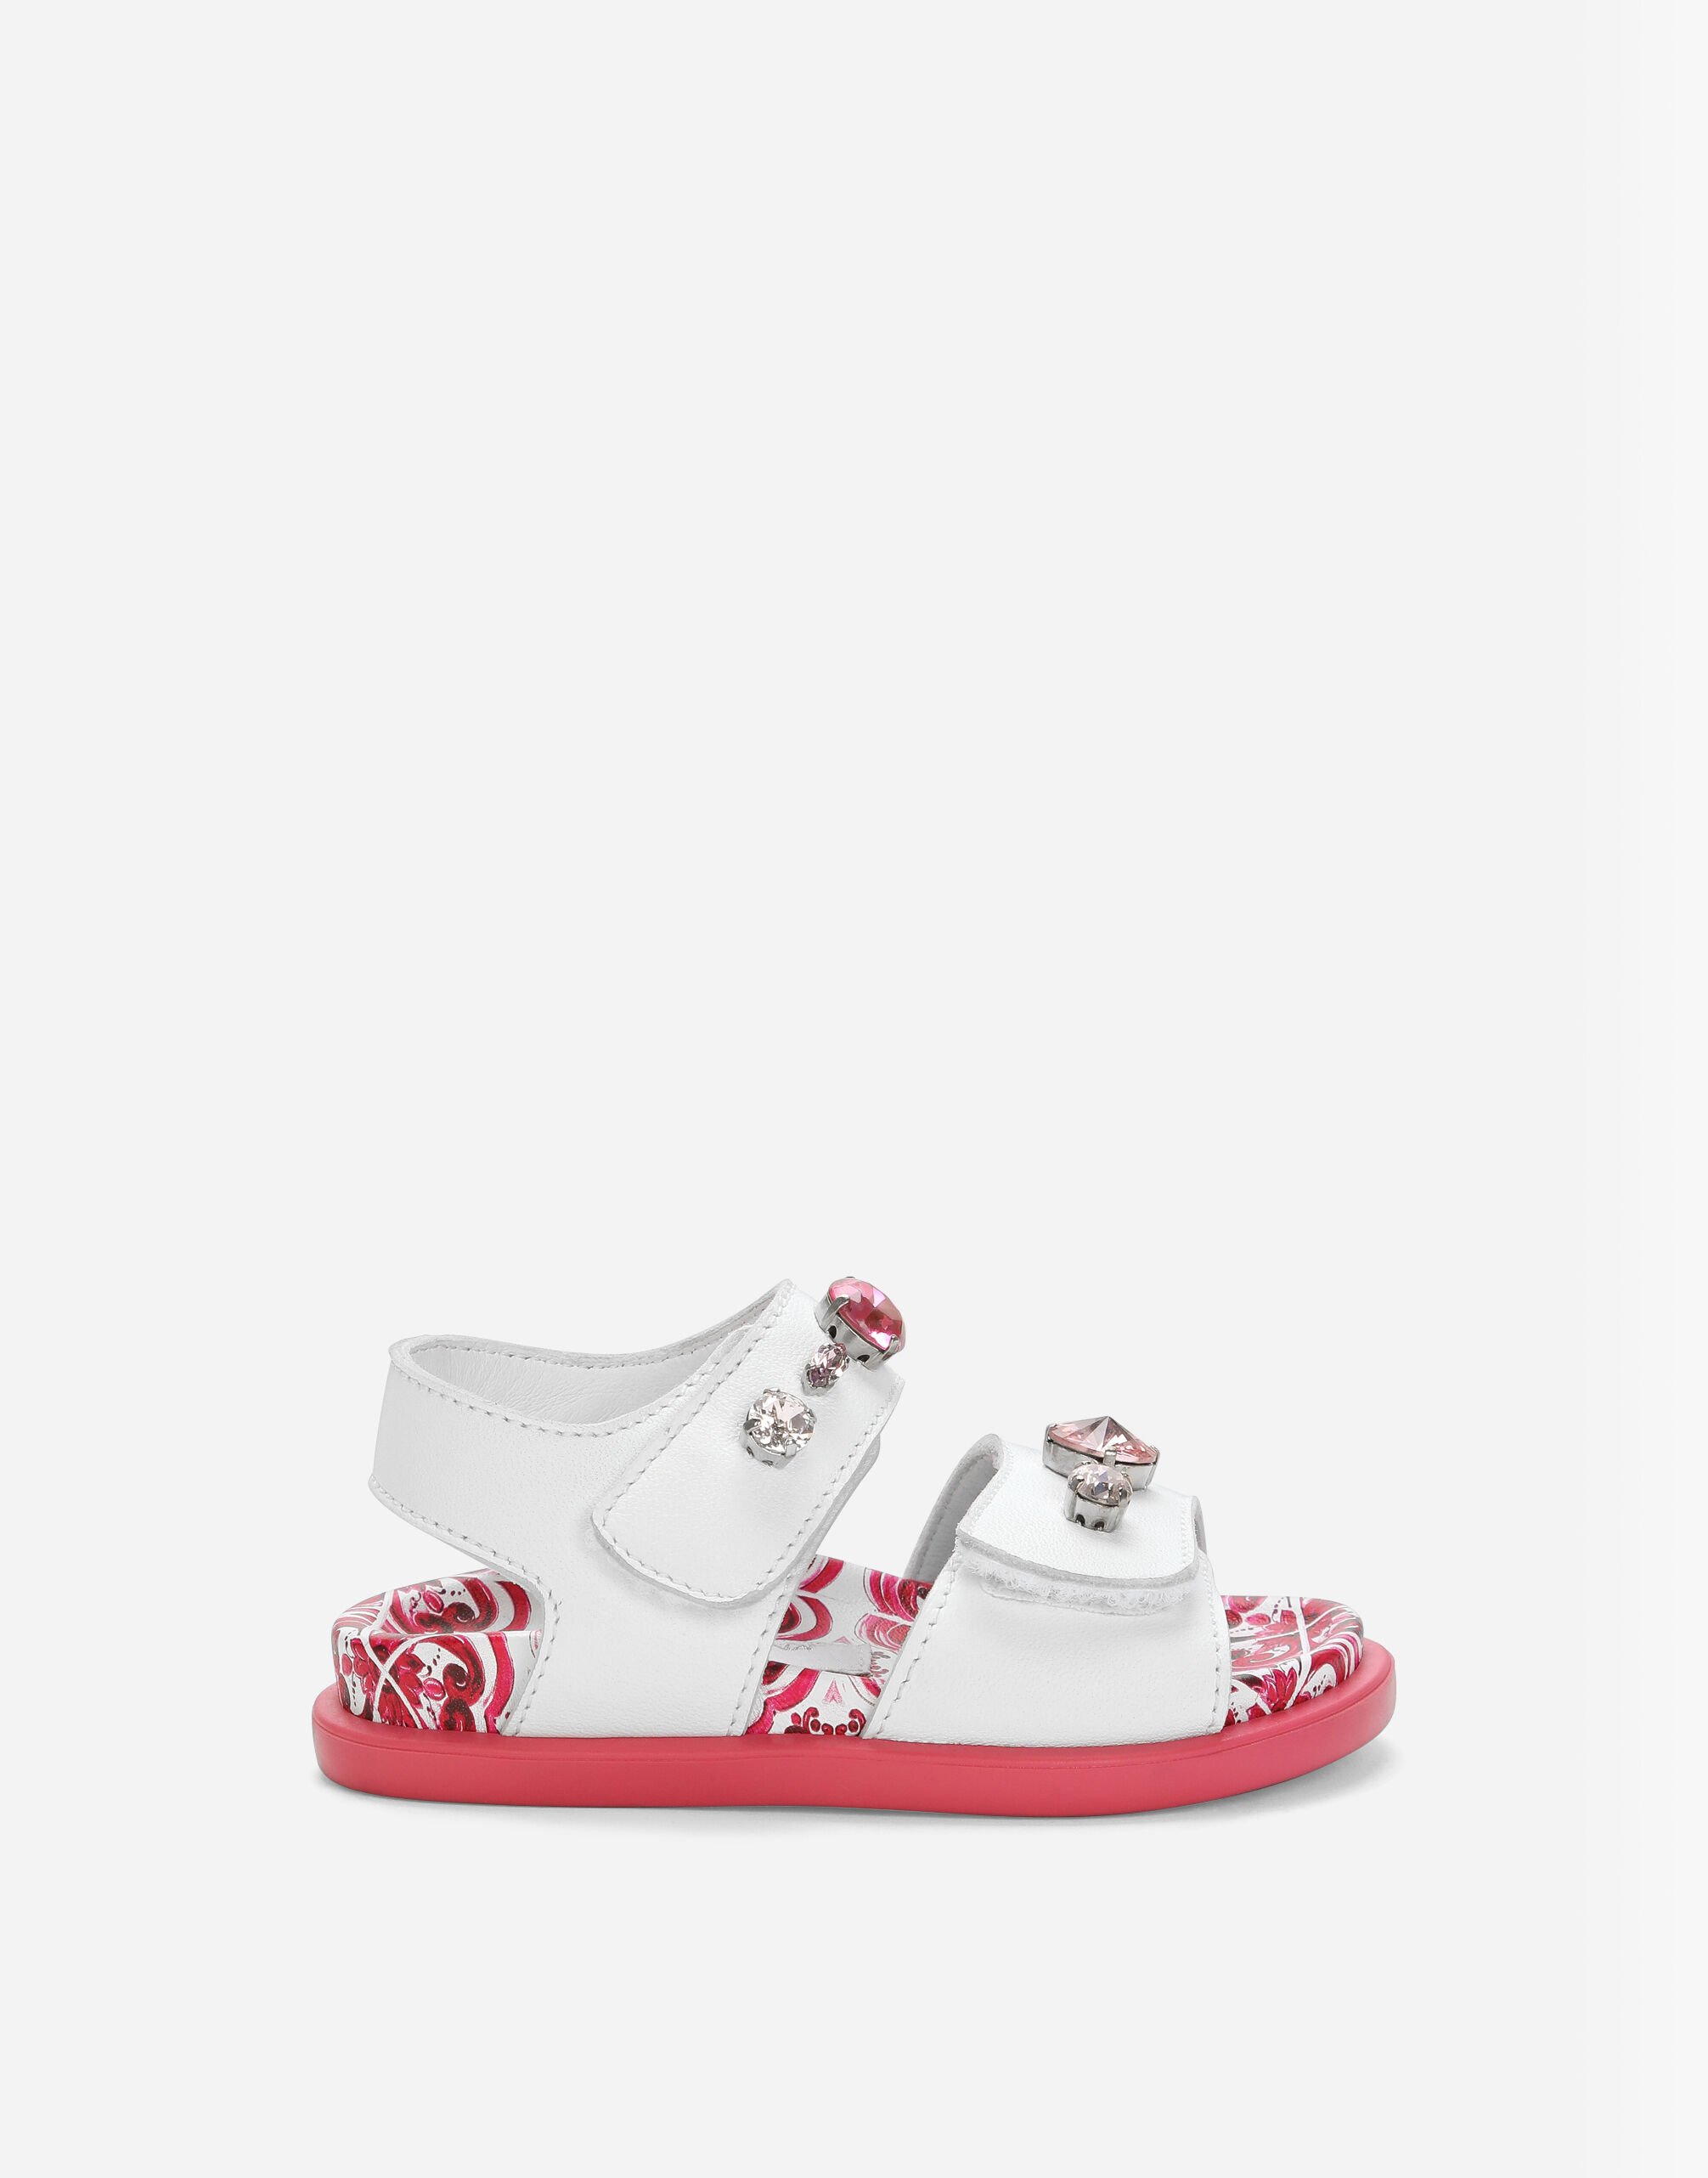 Dolce & Gabbana Patent leather sandals with embellishment Print D20086AD471